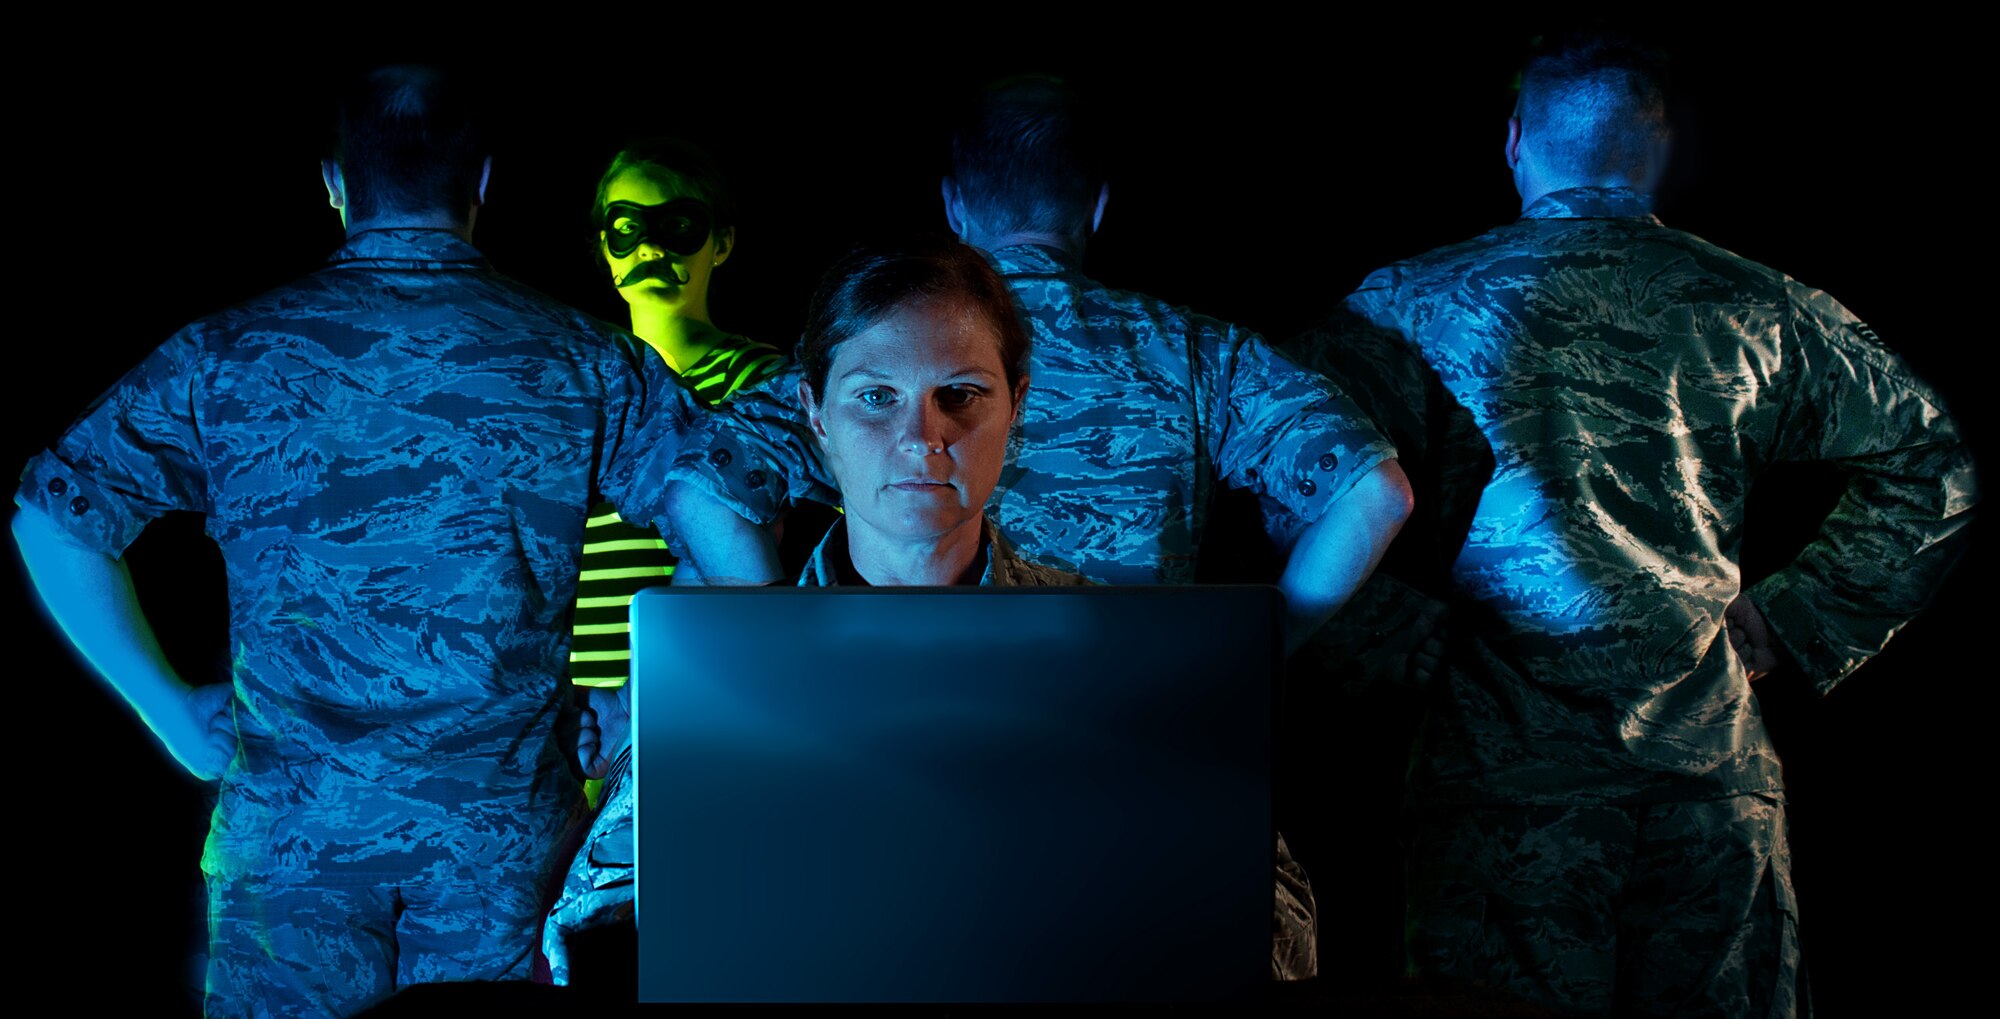 Members of the 157th Communications Flight pose for a portrait on July 25, 2017, at Pease Air National Guard Base, N.H. The cyber defense team protects the computer and information assets of Team Pease. (U.S. Air National Guard photo illustration by Staff Sgt. Kayla Rorick)